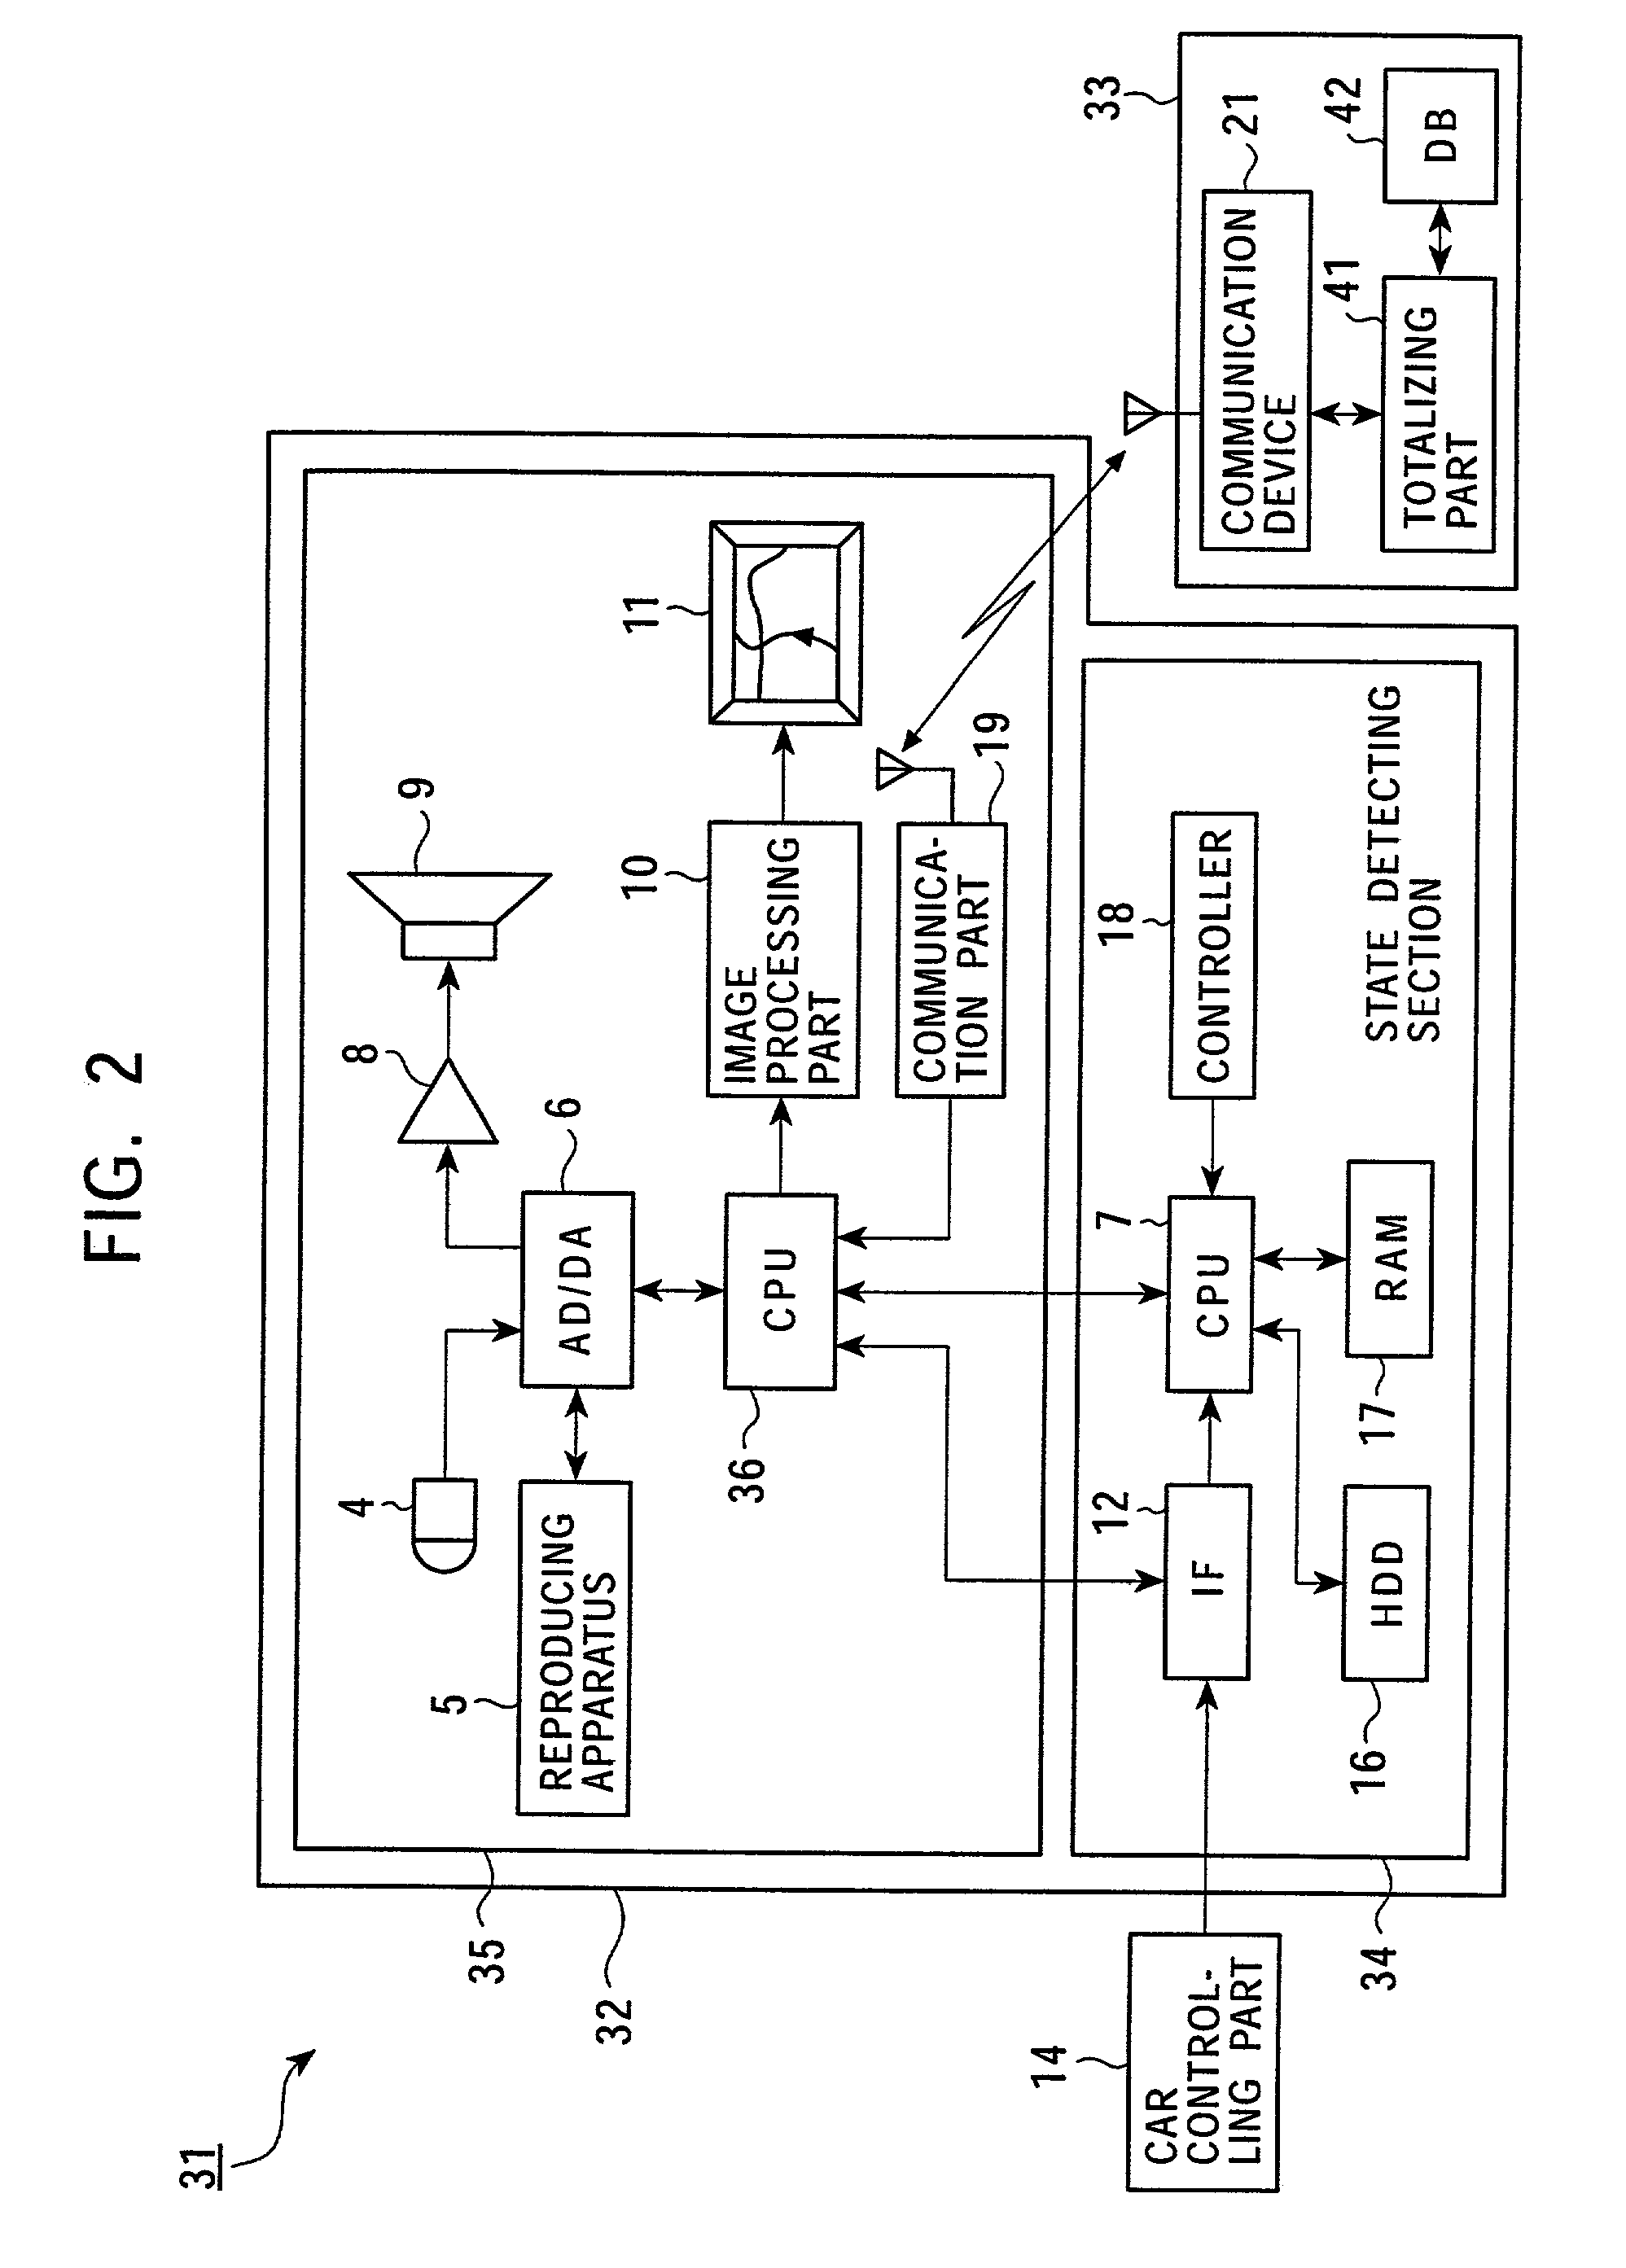 Information processing apparatus, information processing method and program executed in information processing apparatus